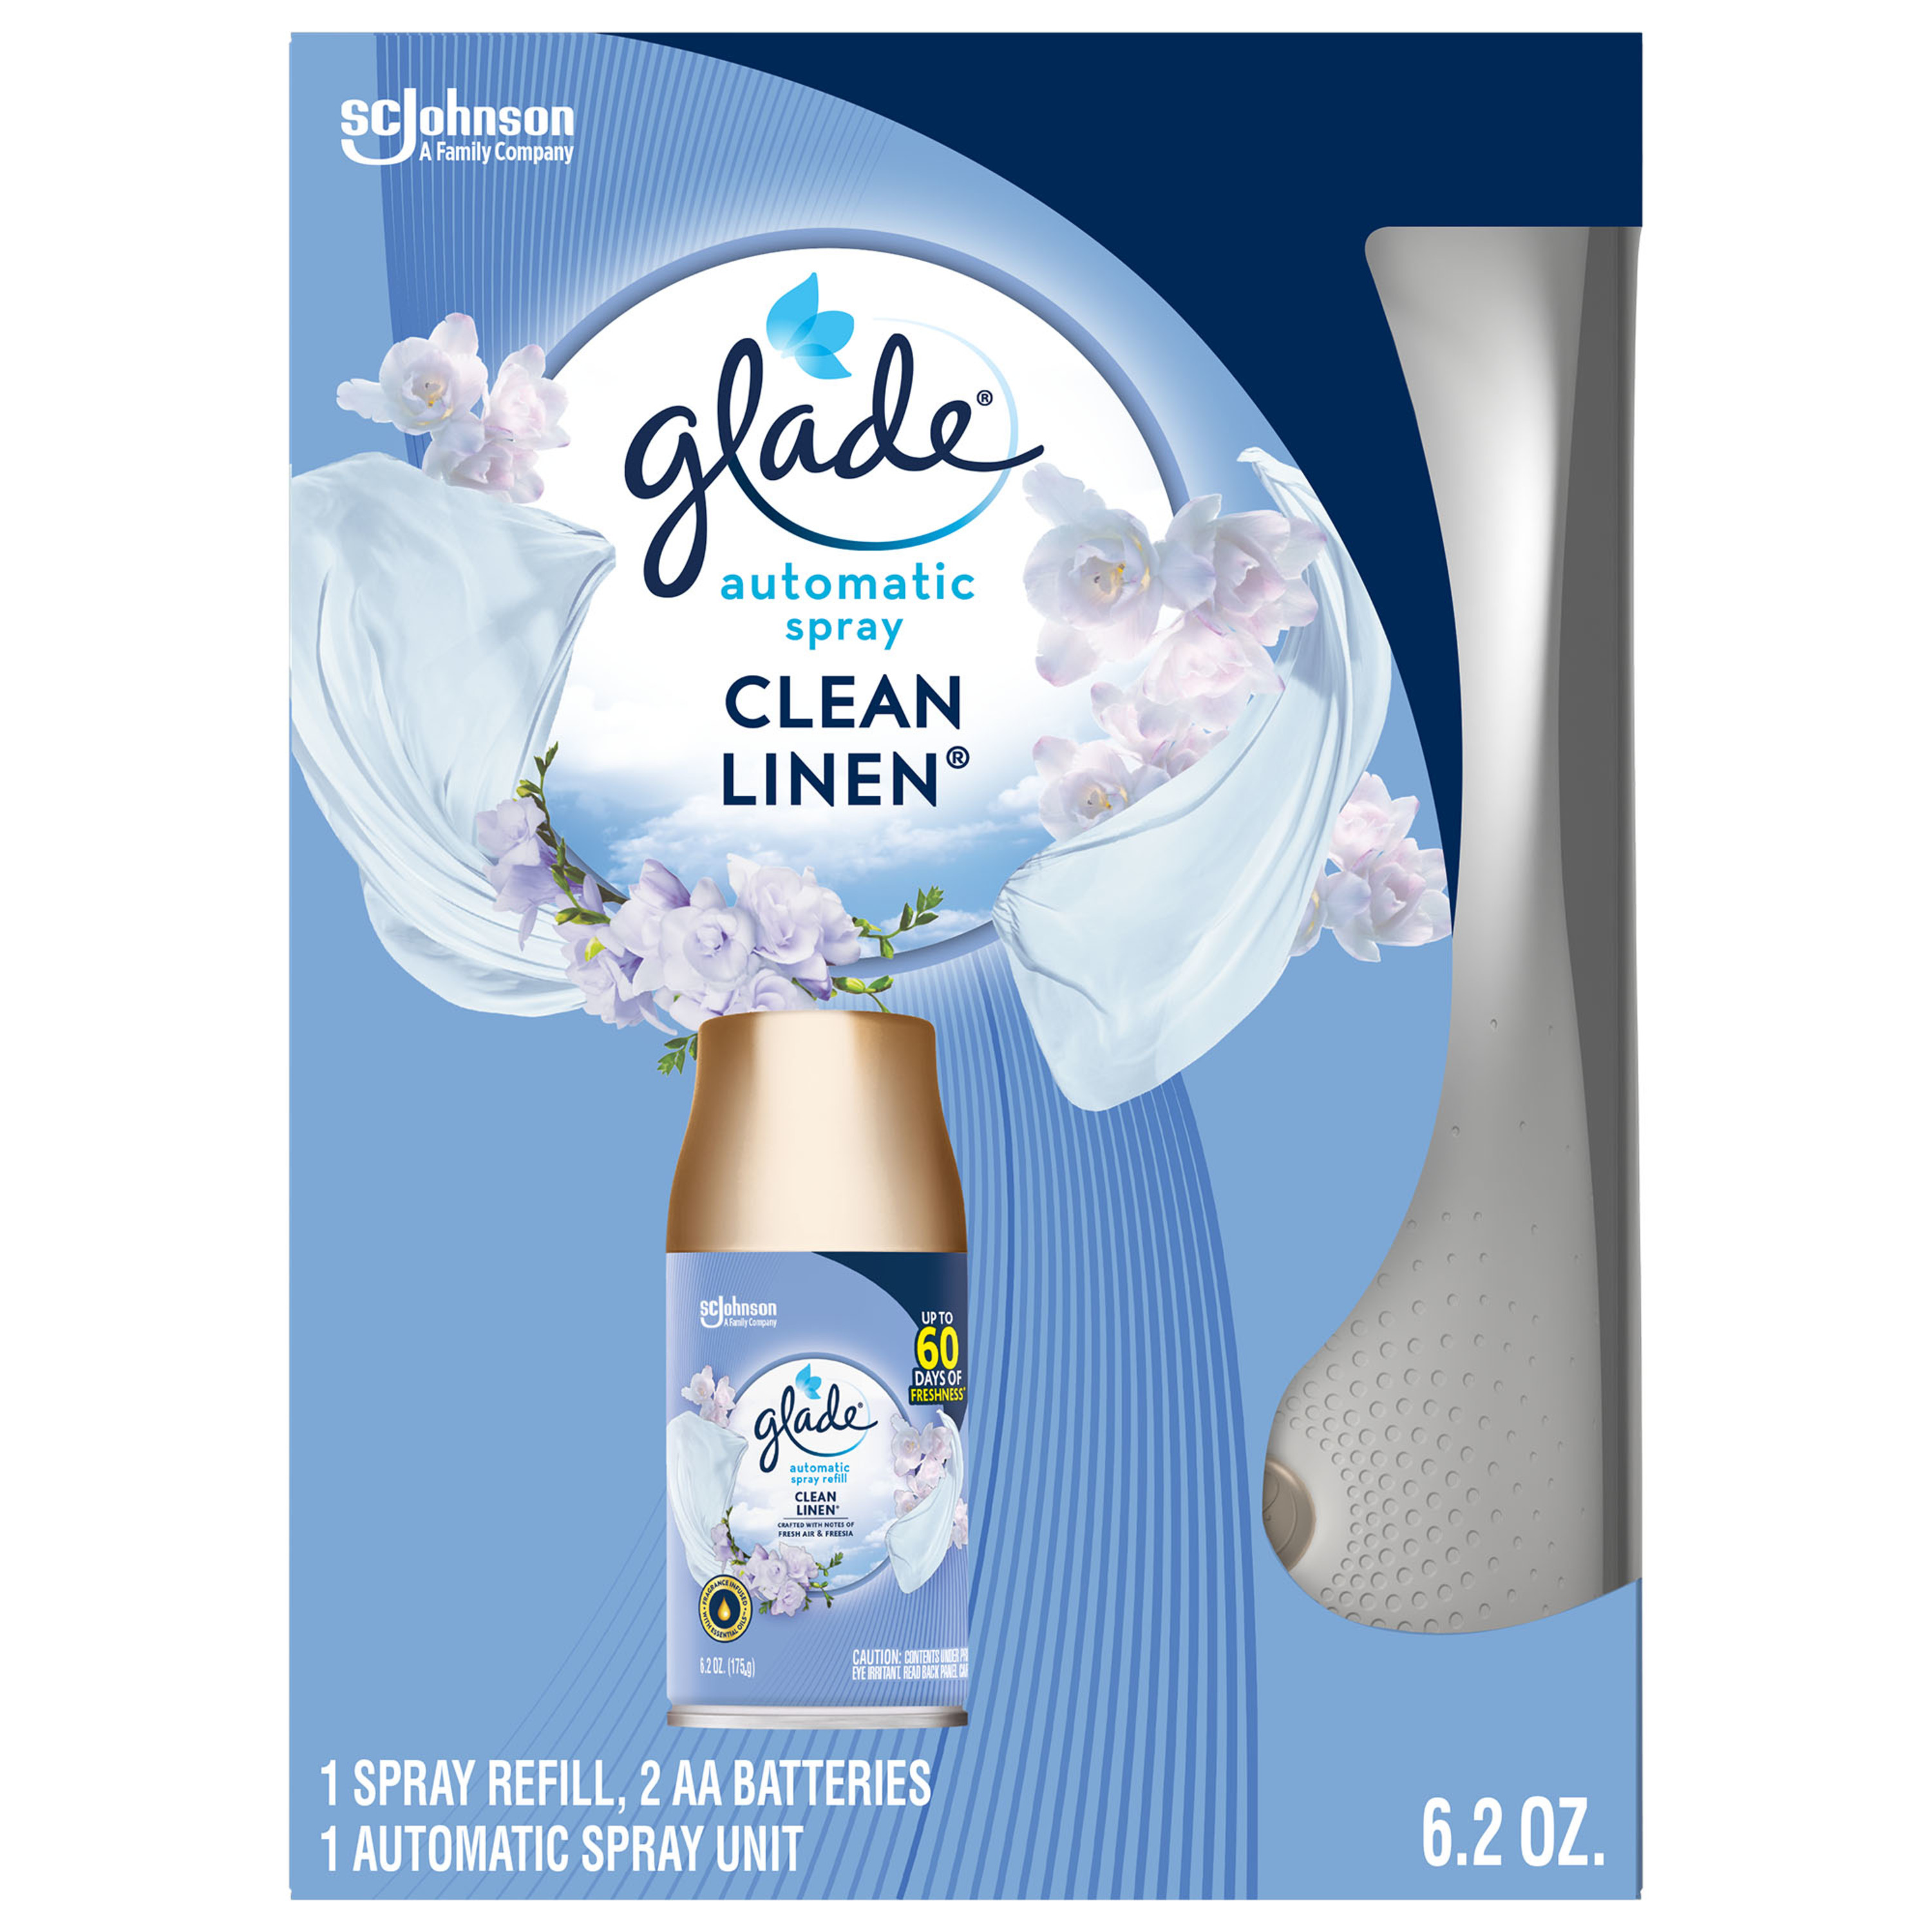 Glade Automatic Spray Air Freshener Starter Kit, 1 Holder and 1 Refill, Mothers Day Gifts, Clean Linen, Fragrance Infused with Essential Oils, 6.2 oz - image 1 of 17